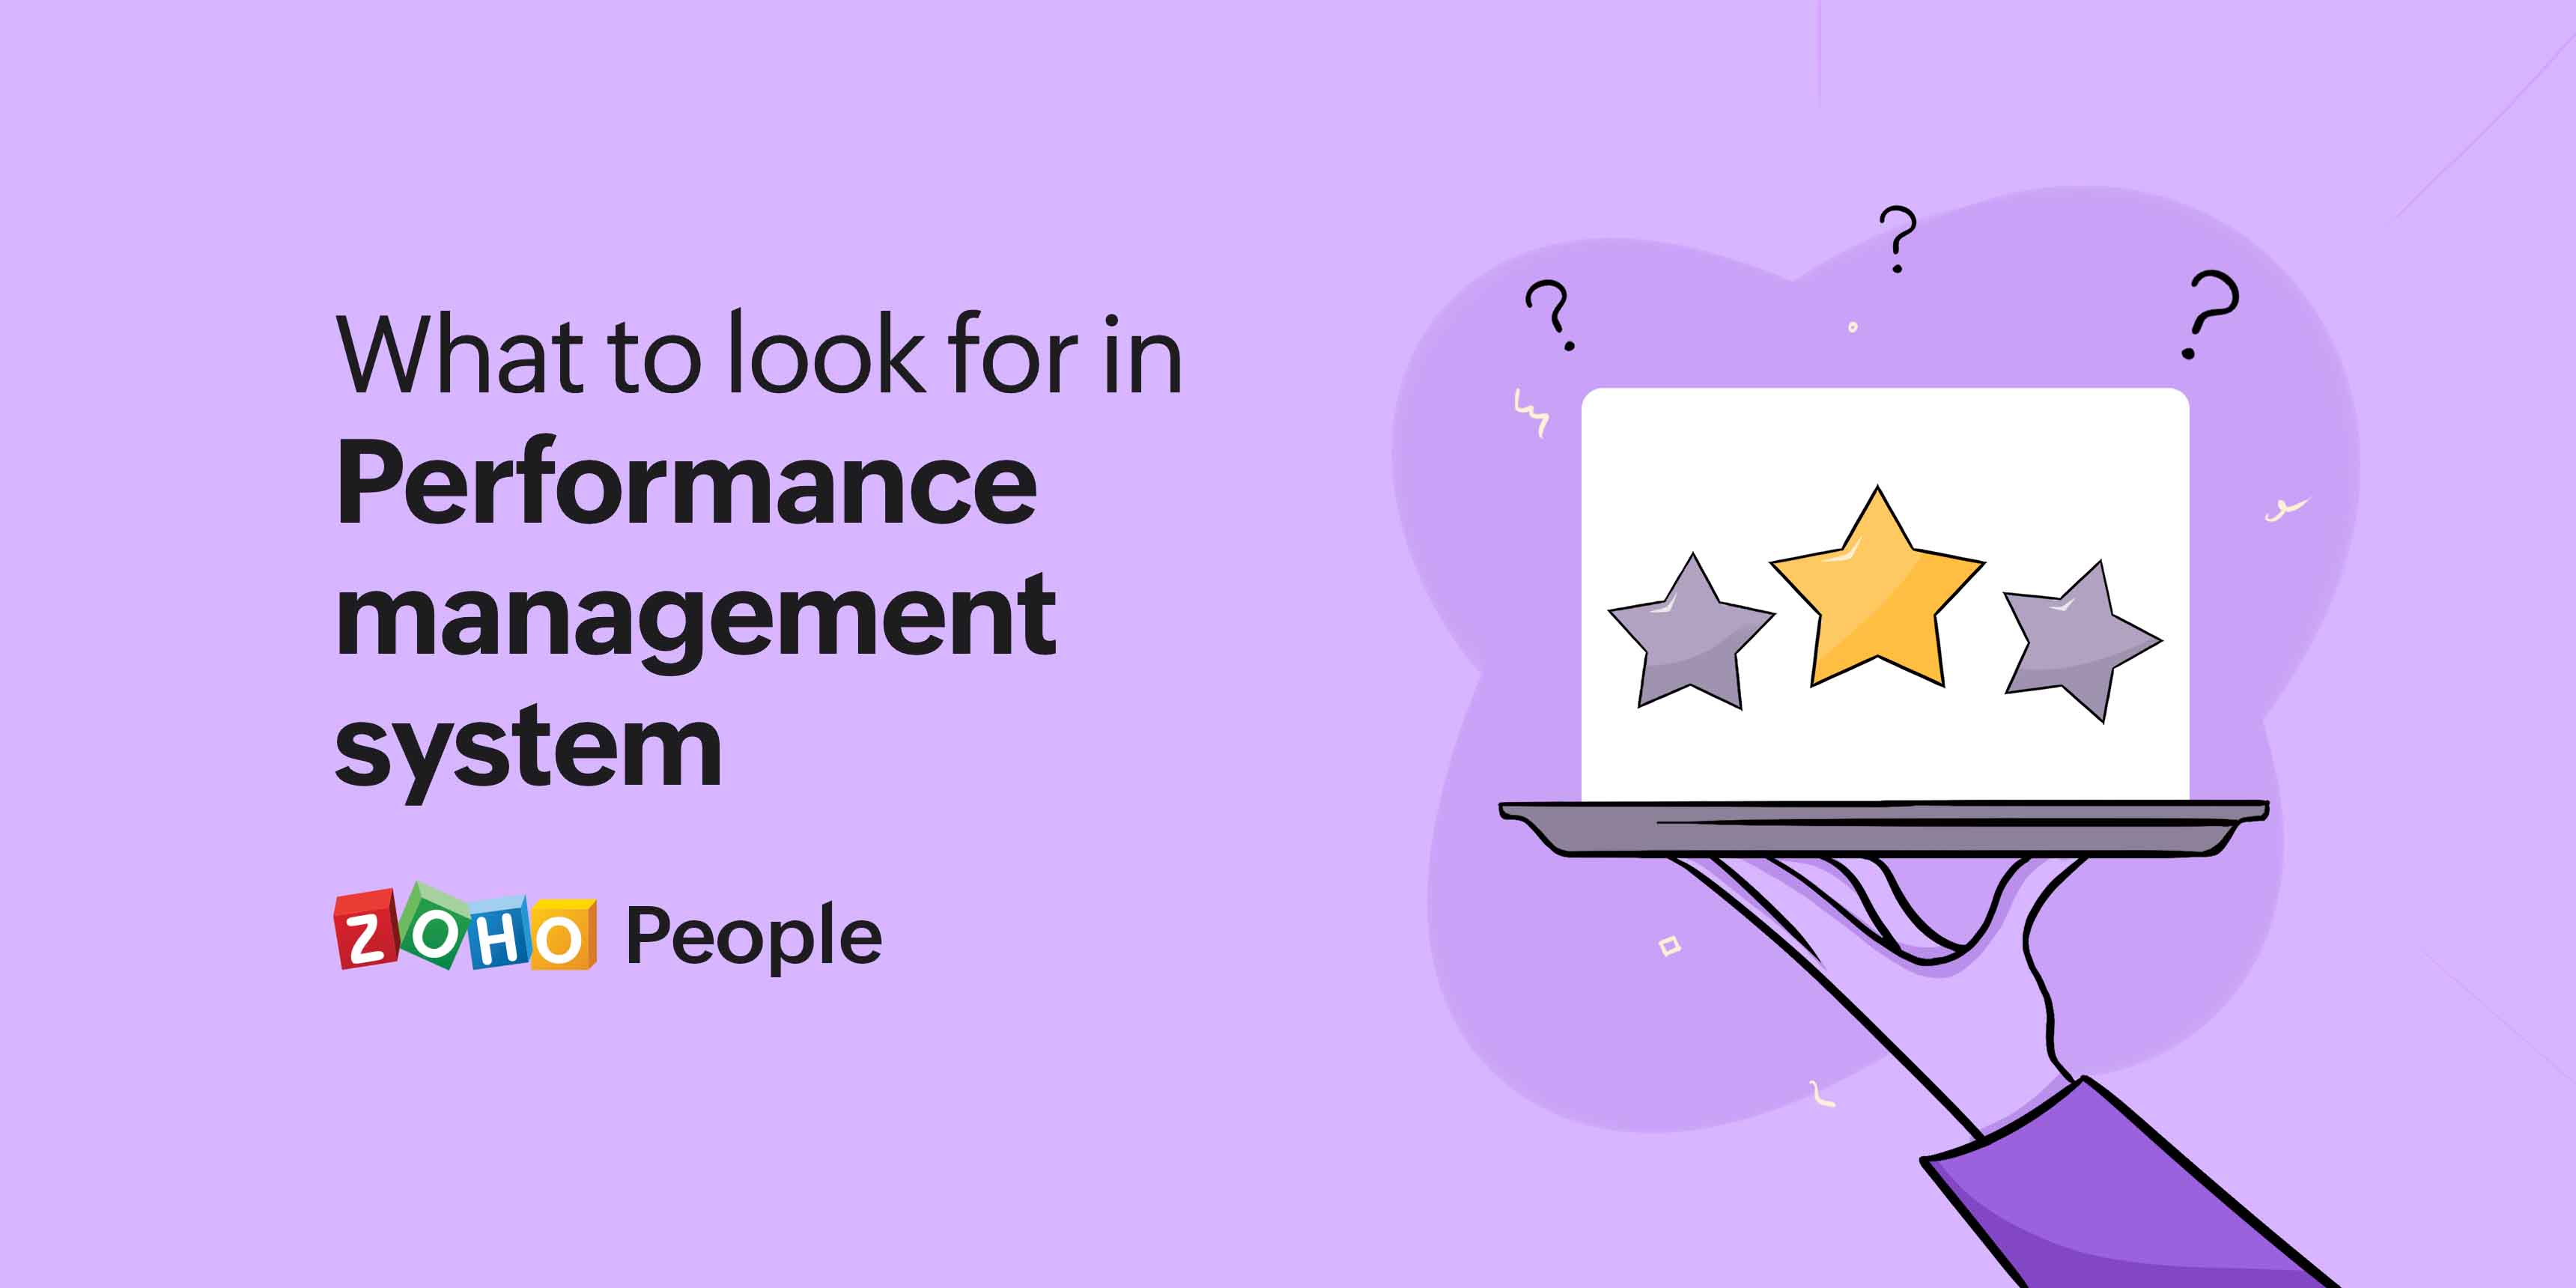 HR tech basics: 5 features to look for in your next performance management system